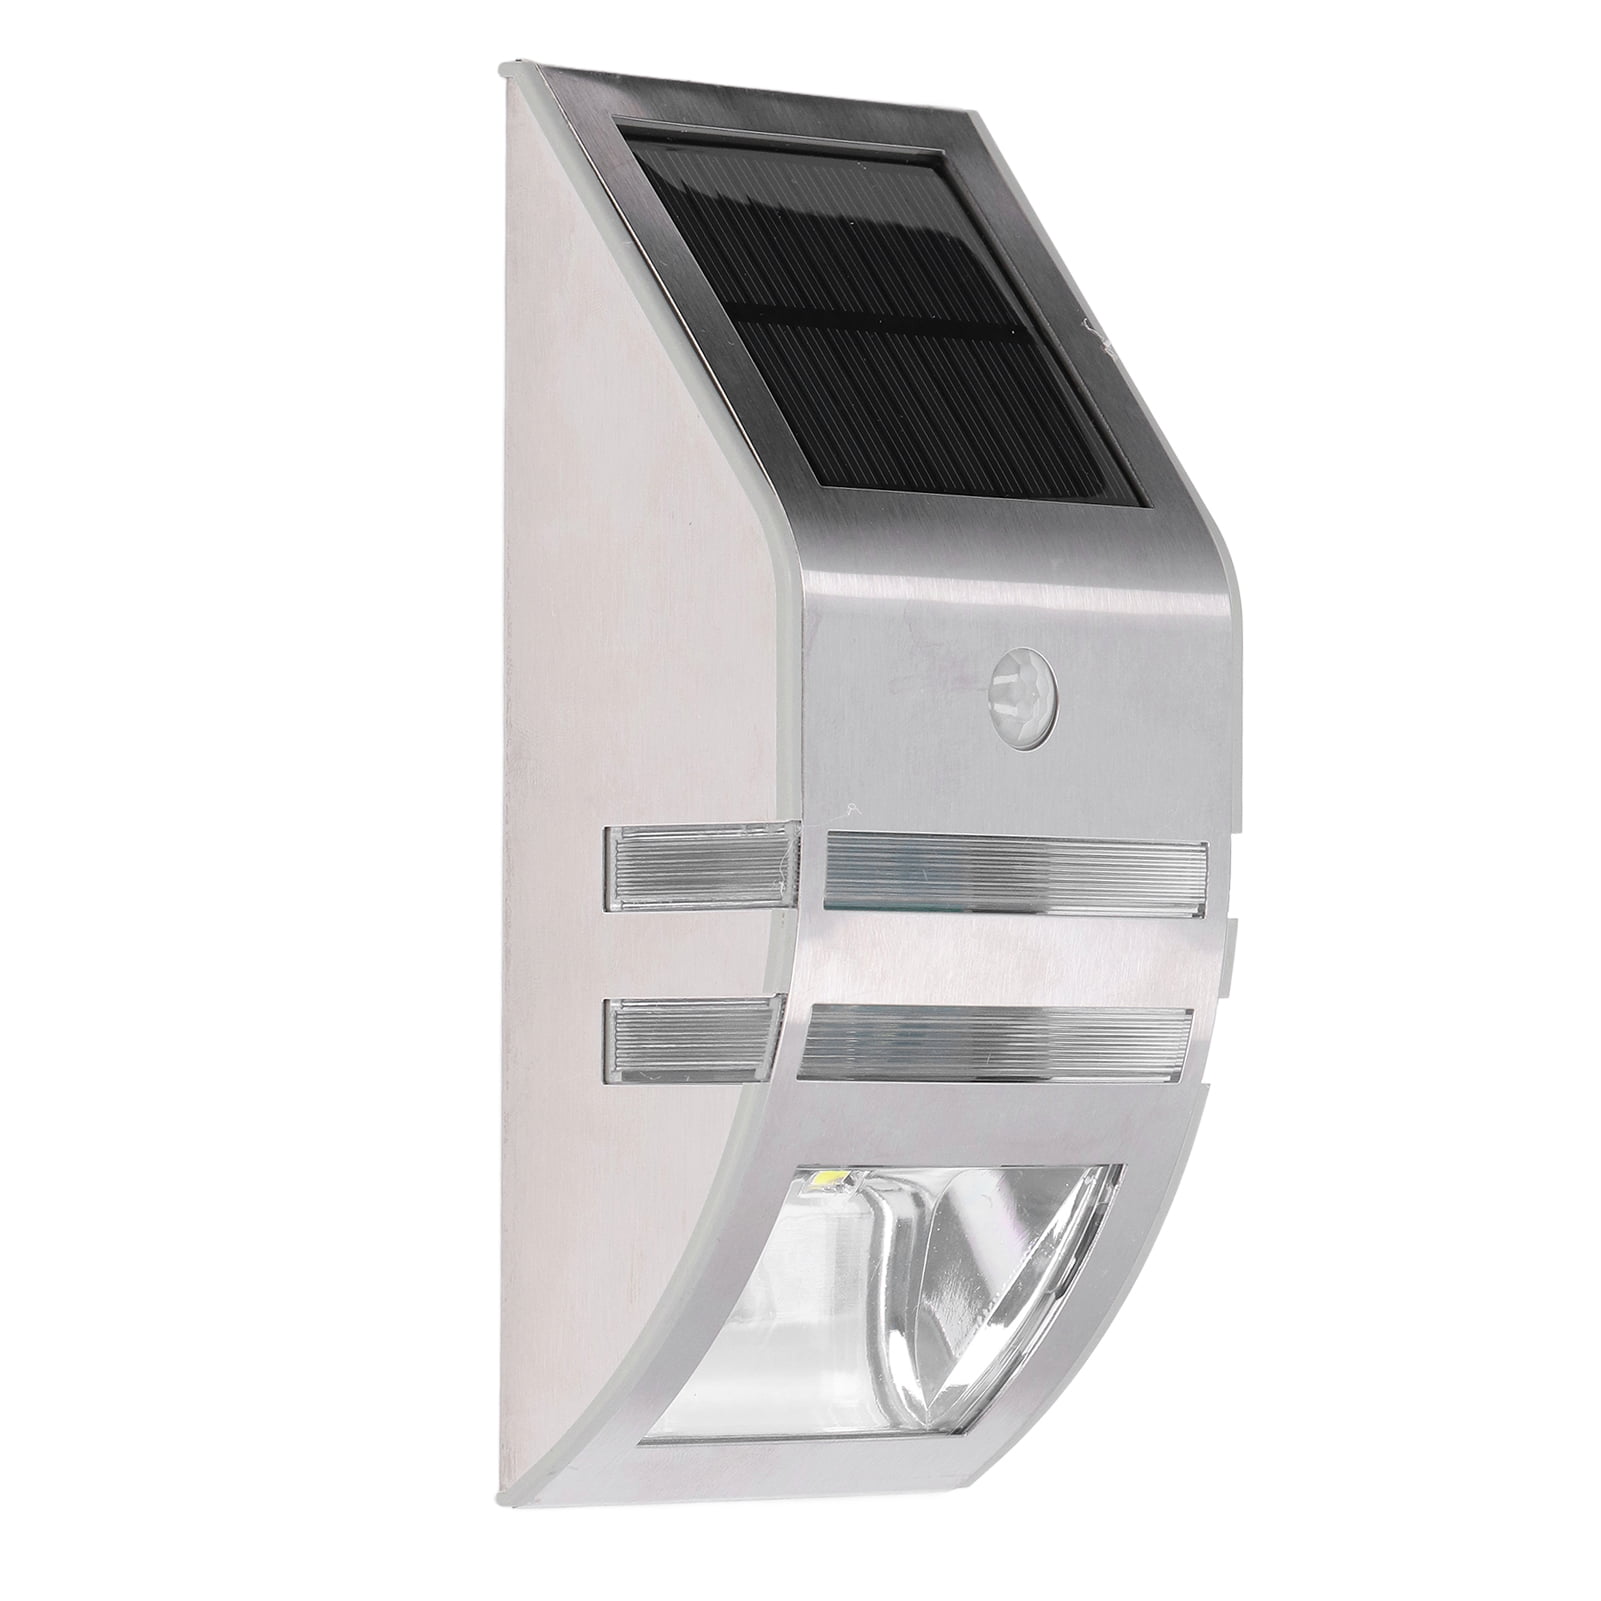 Rugged Outdoor Light Stainless Steel Outdoor Wall Light Stainless Steel Wall Lamp 